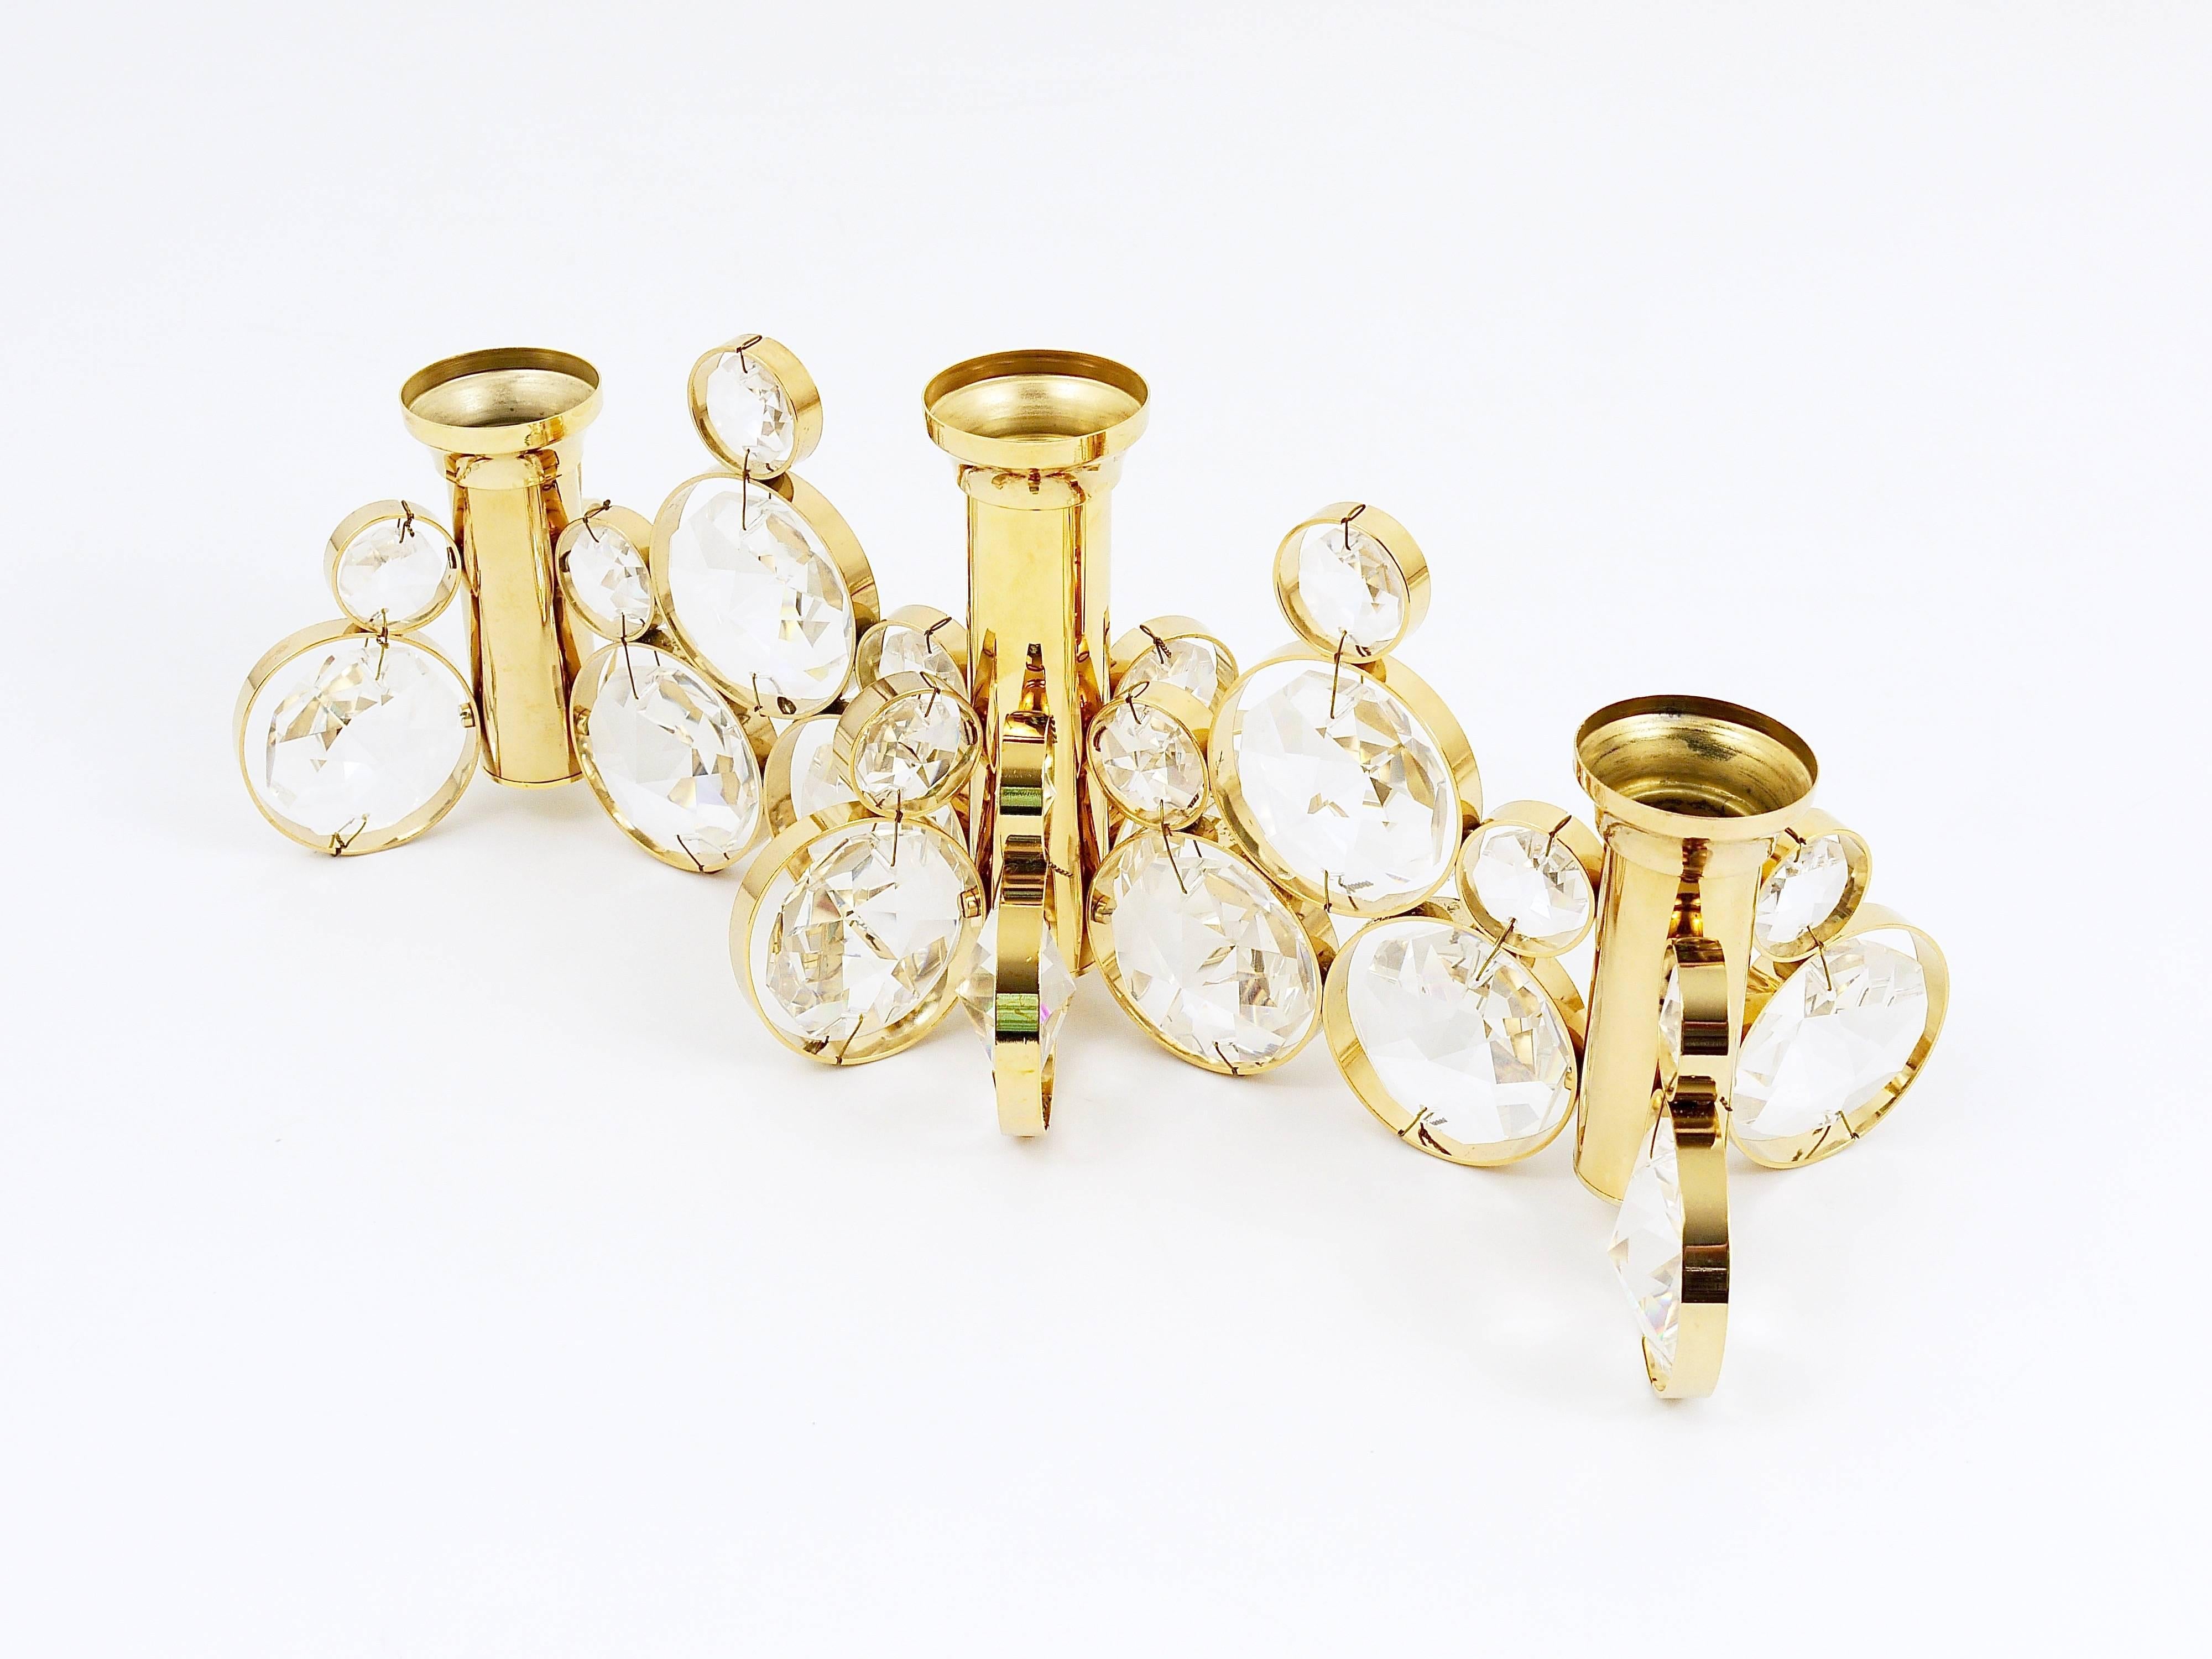 Up to five beautiful candle holders in the style of Gaetano Sciolari. Manufactured in the 1970s by Palwa Germany. Made of gold-plated brass with huge faceted crystals. In excellent condition. There are five identical candleholders available, the